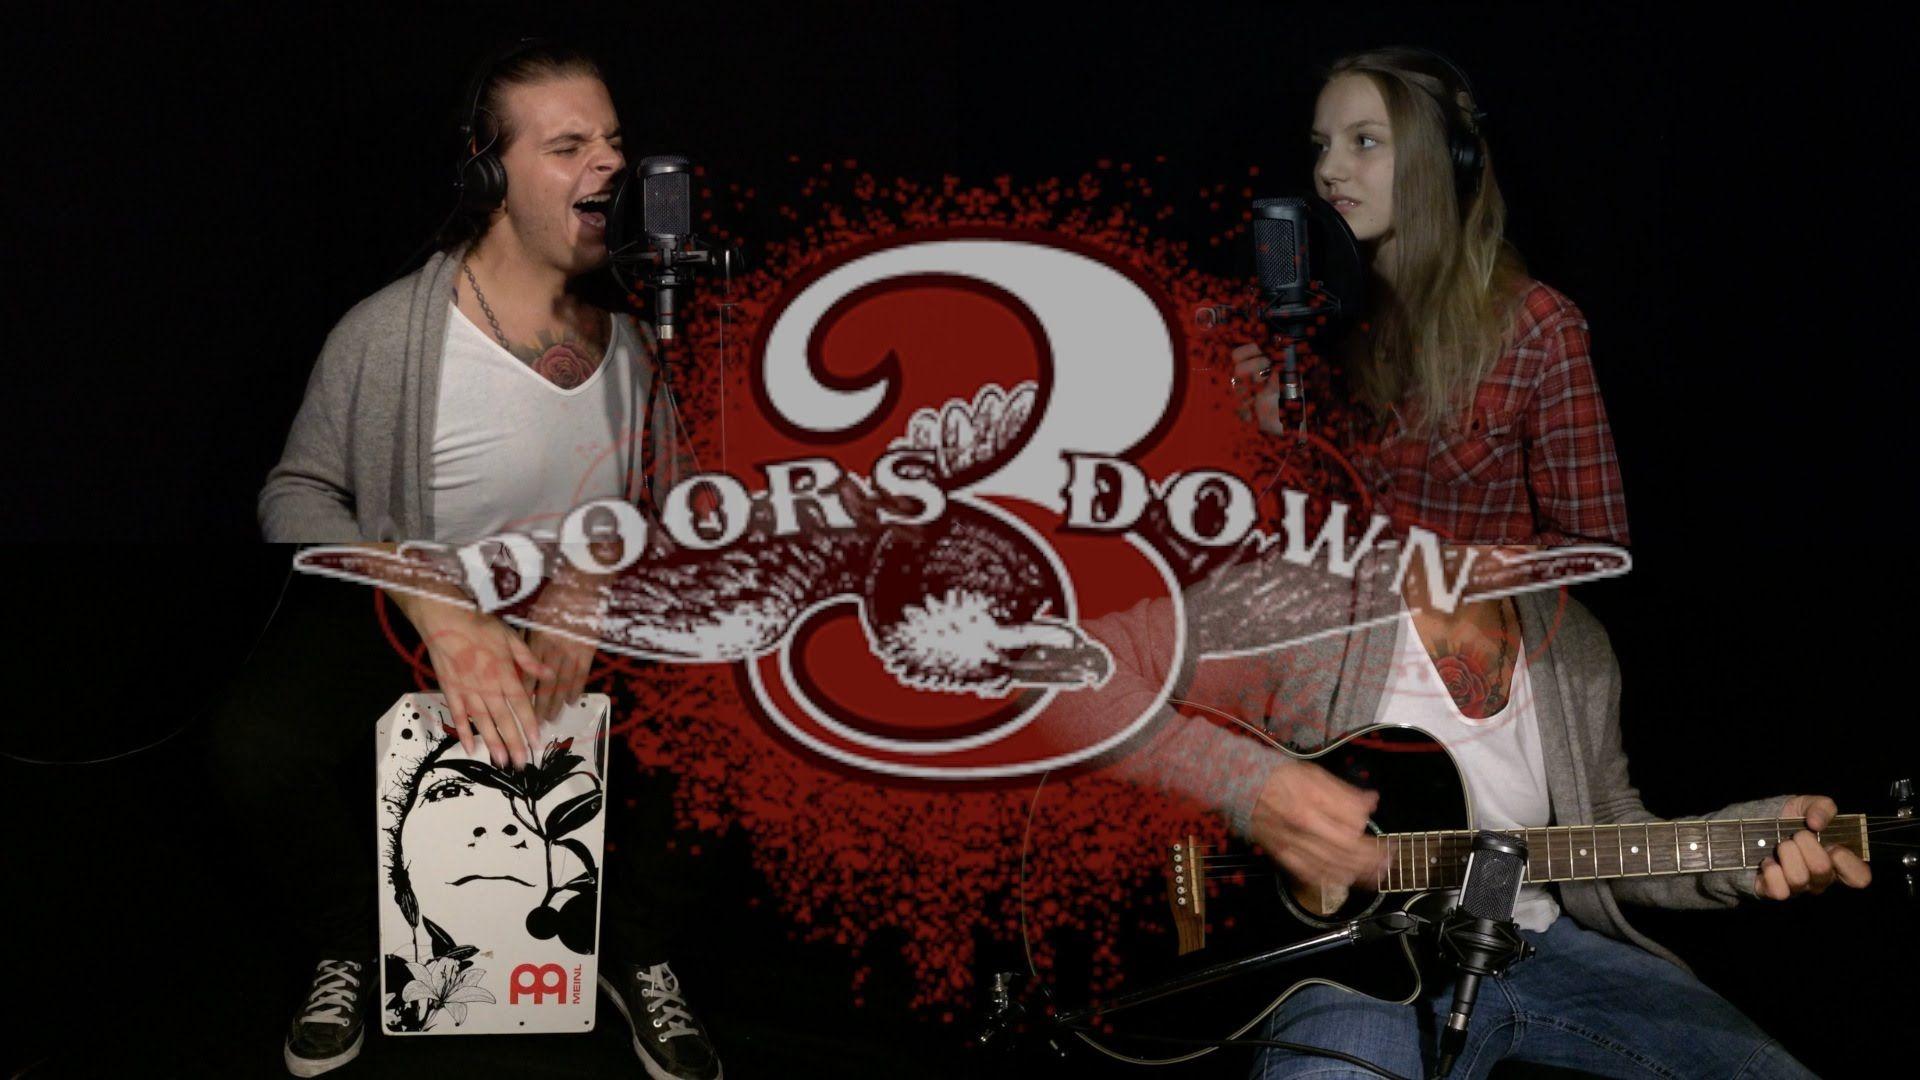 Doors Down Without You Covers feat. Dorina